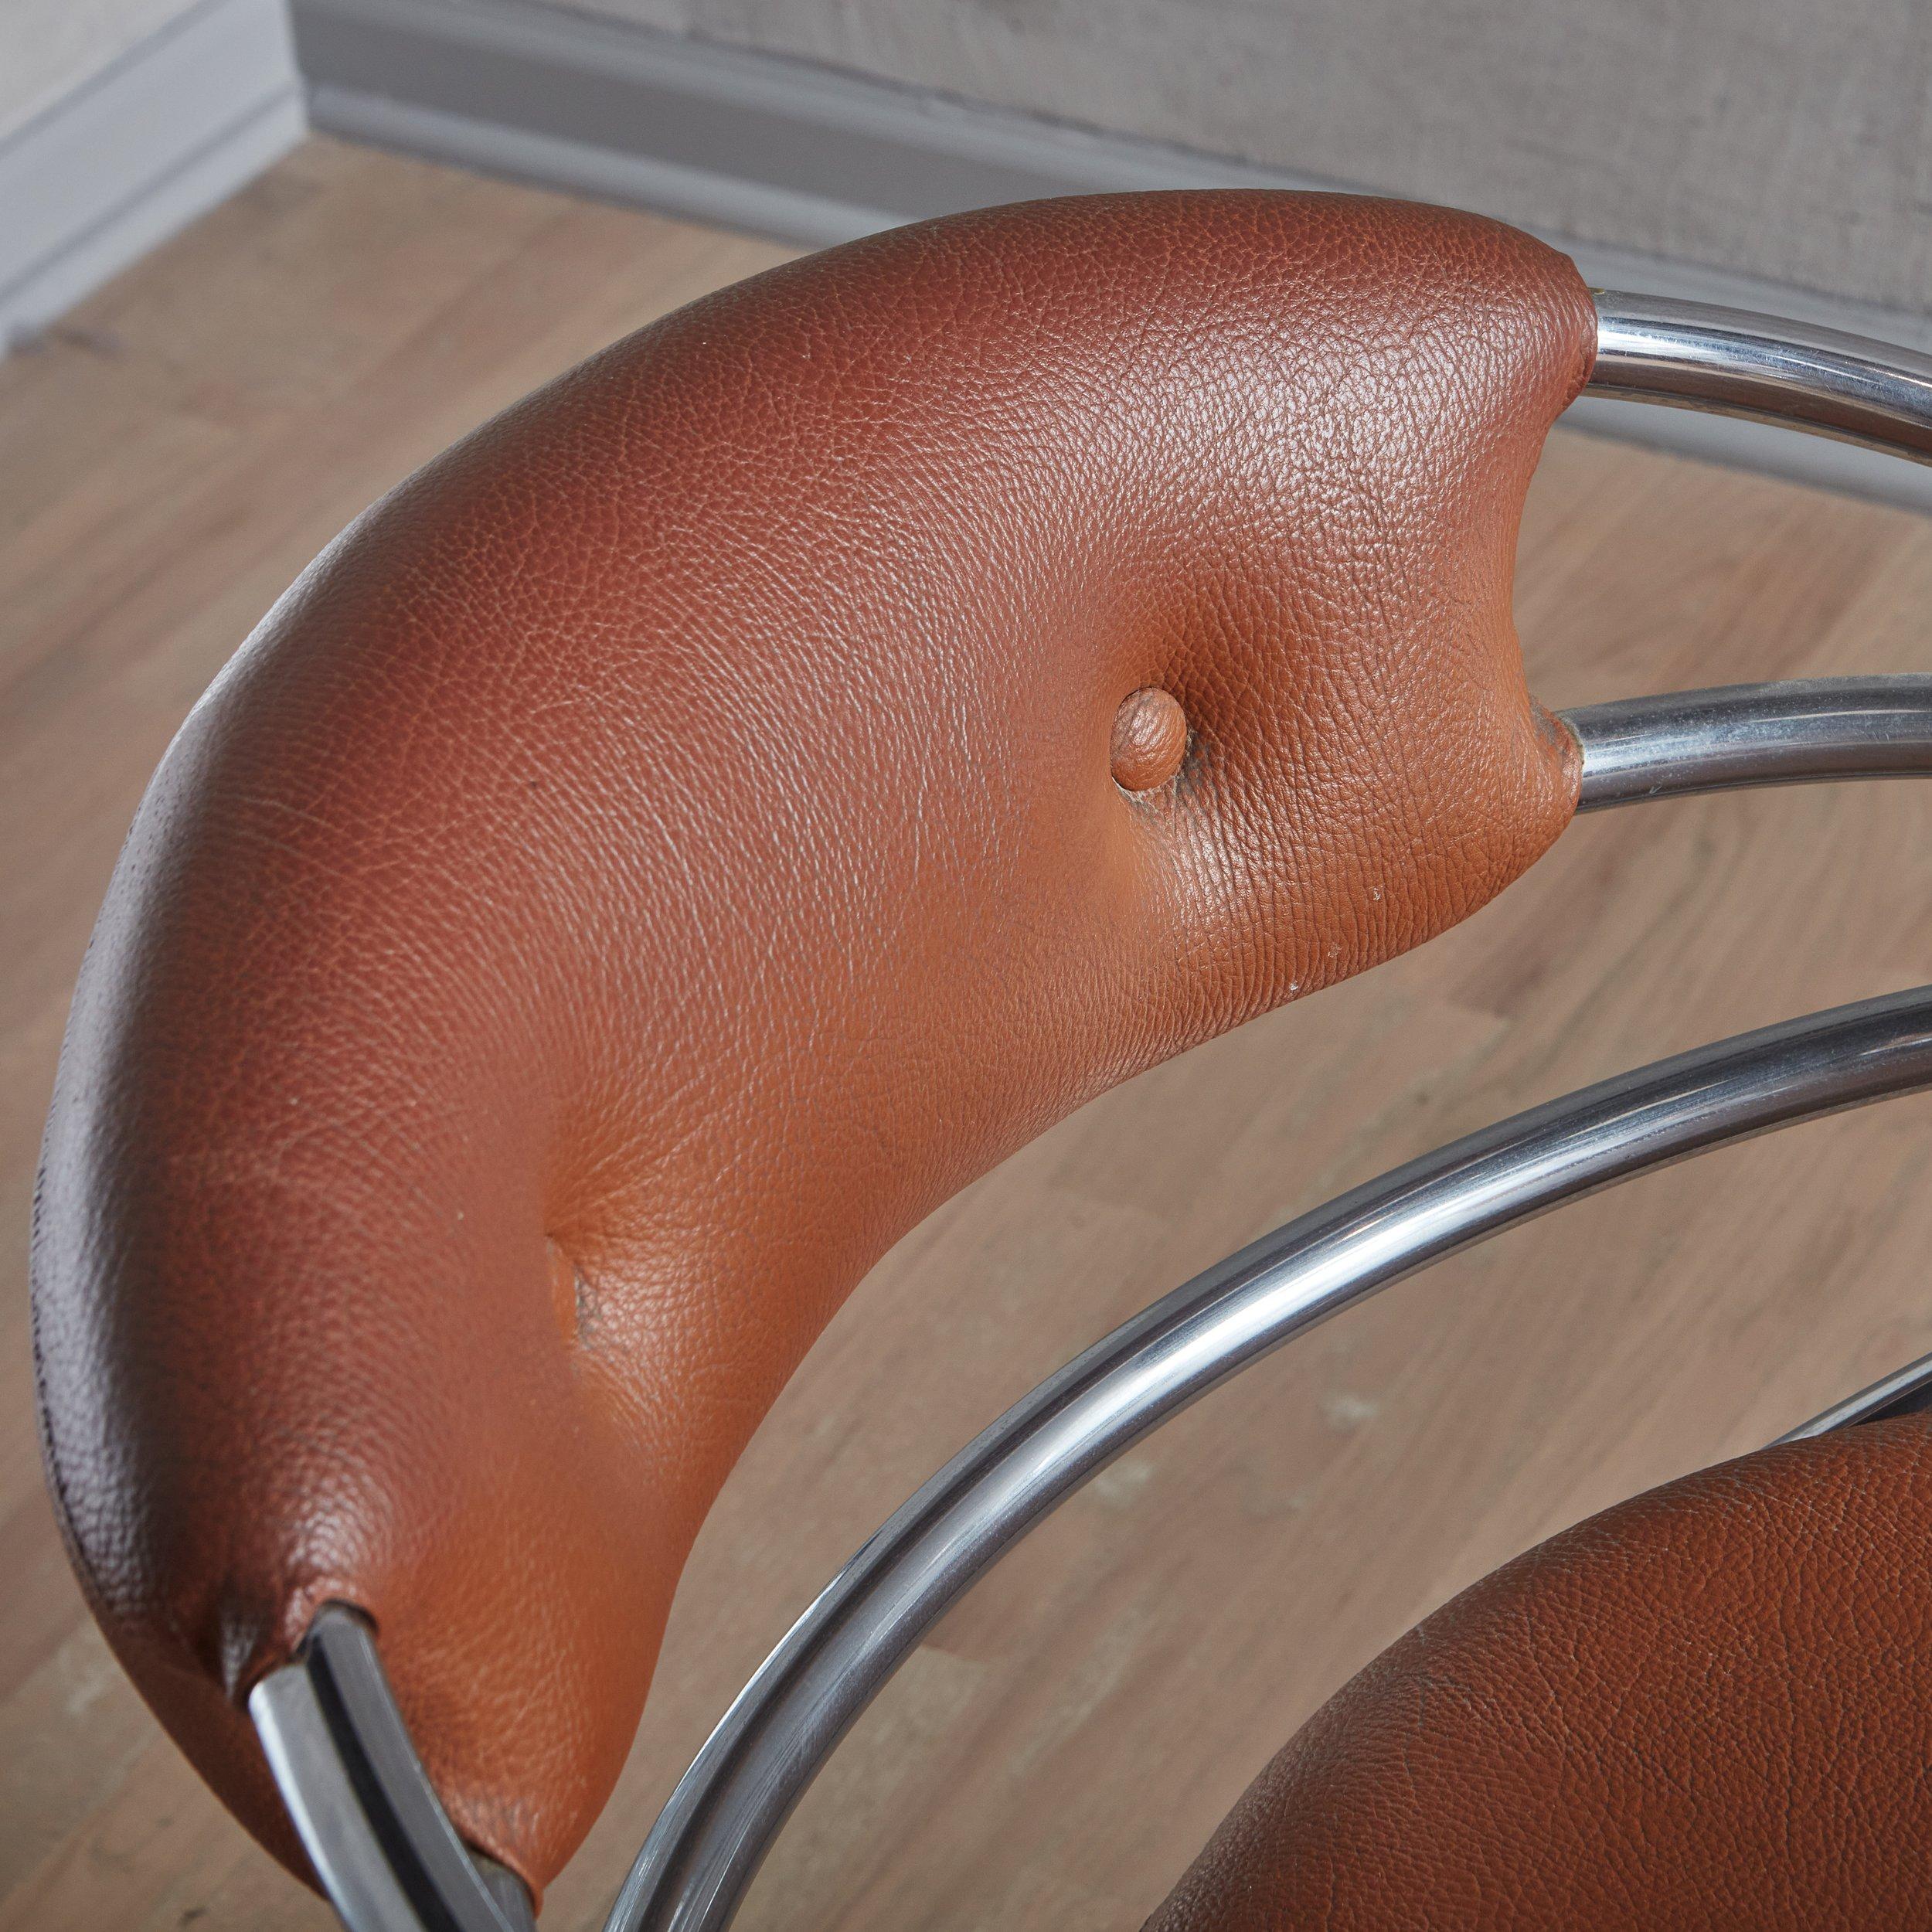 Chrome Swivel Desk Chair in Brown Leather, Italy 1960s - 2 Available For Sale 1